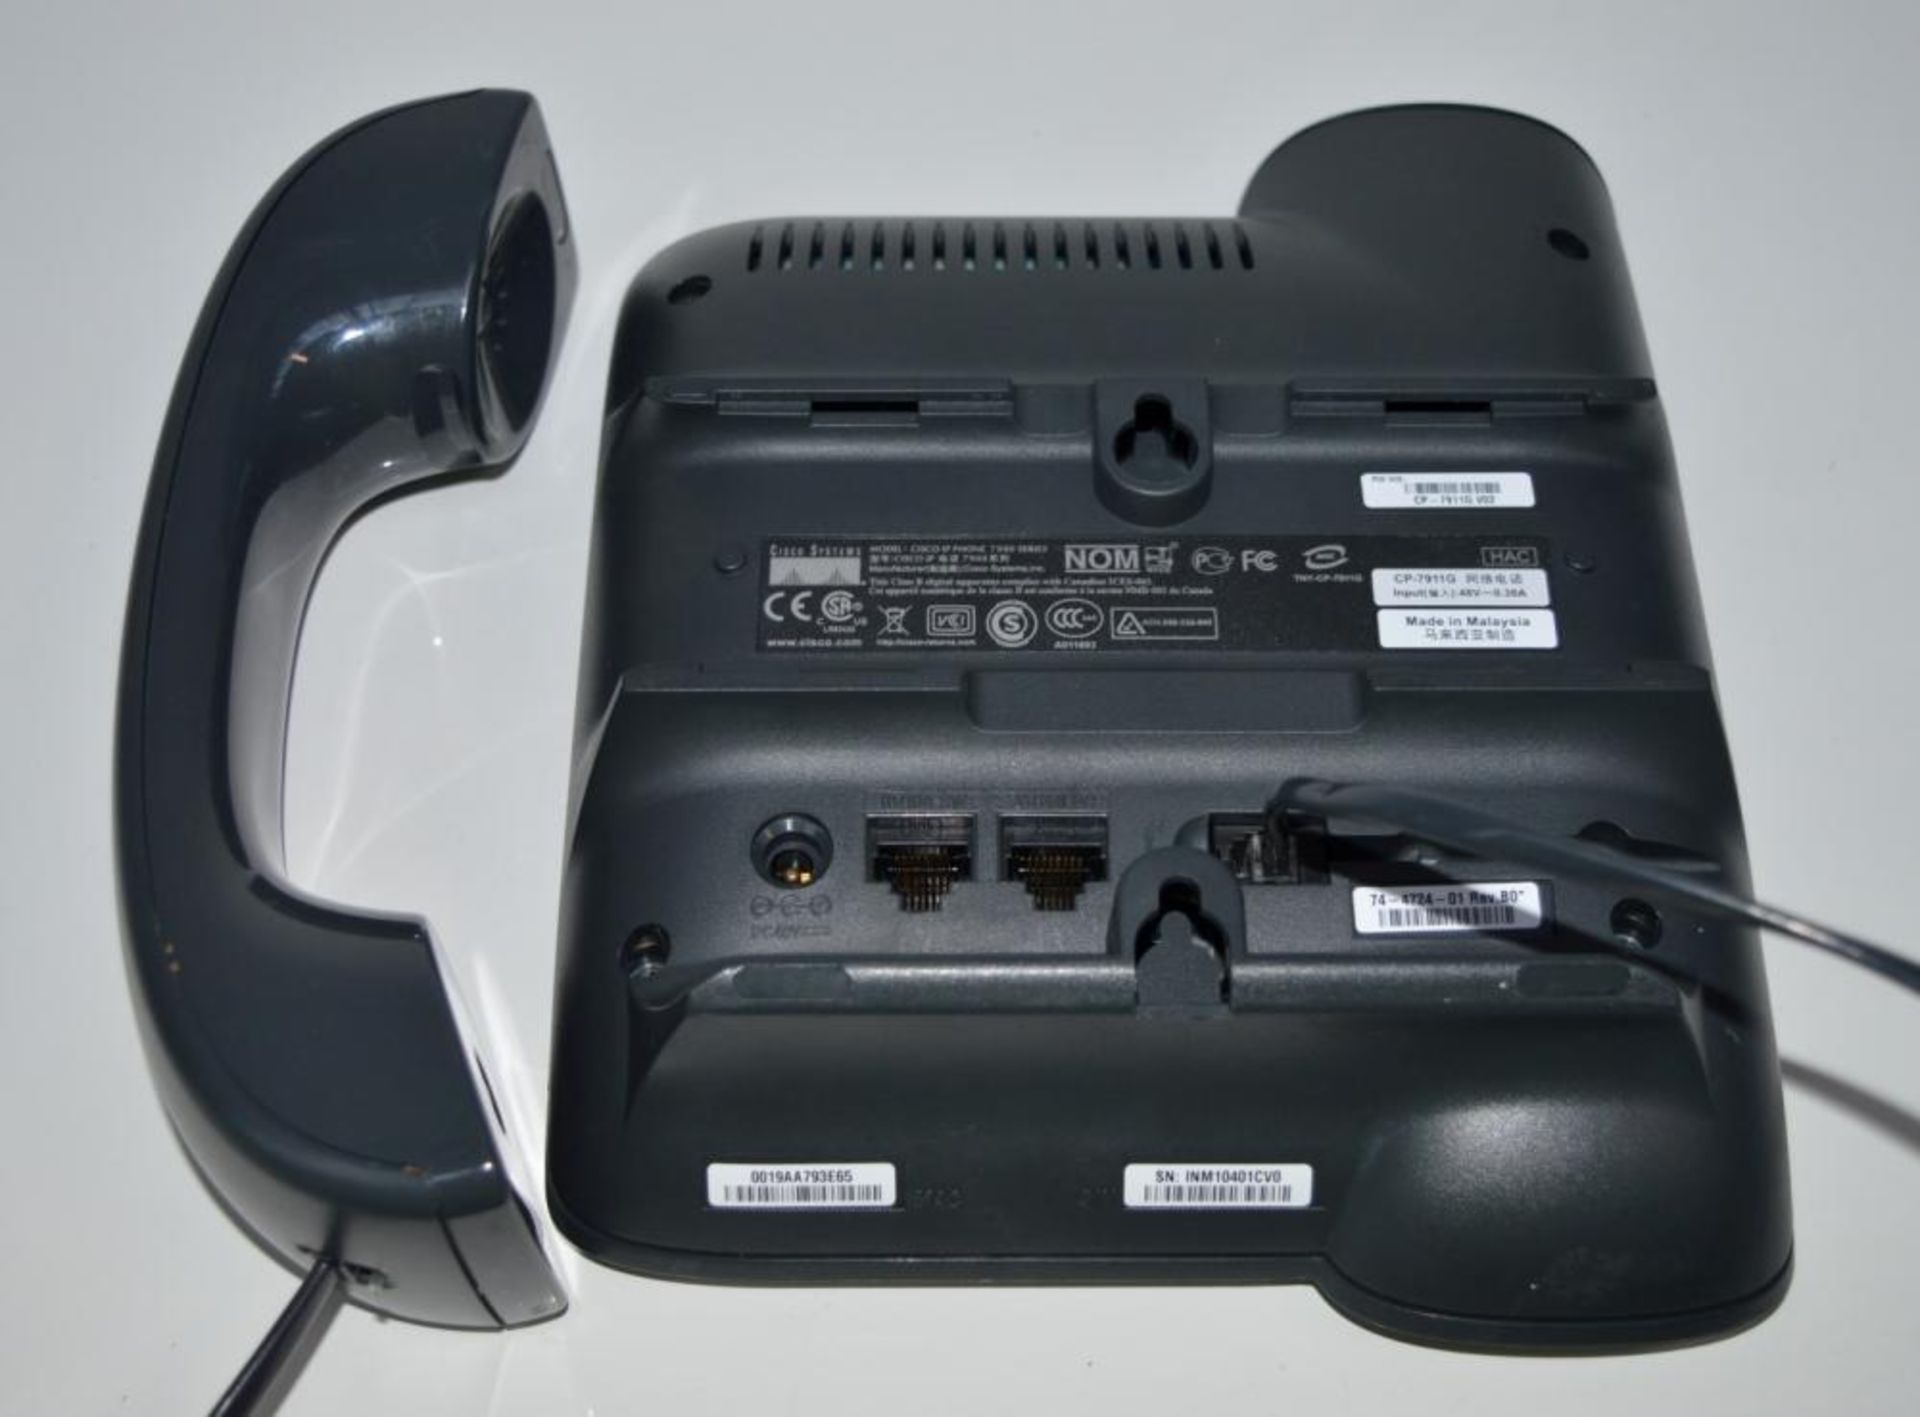 4 x Cisco CP-7911G Unified IP SIP Phones - Removed From a Working Office Environment in Good Conditi - Image 7 of 8